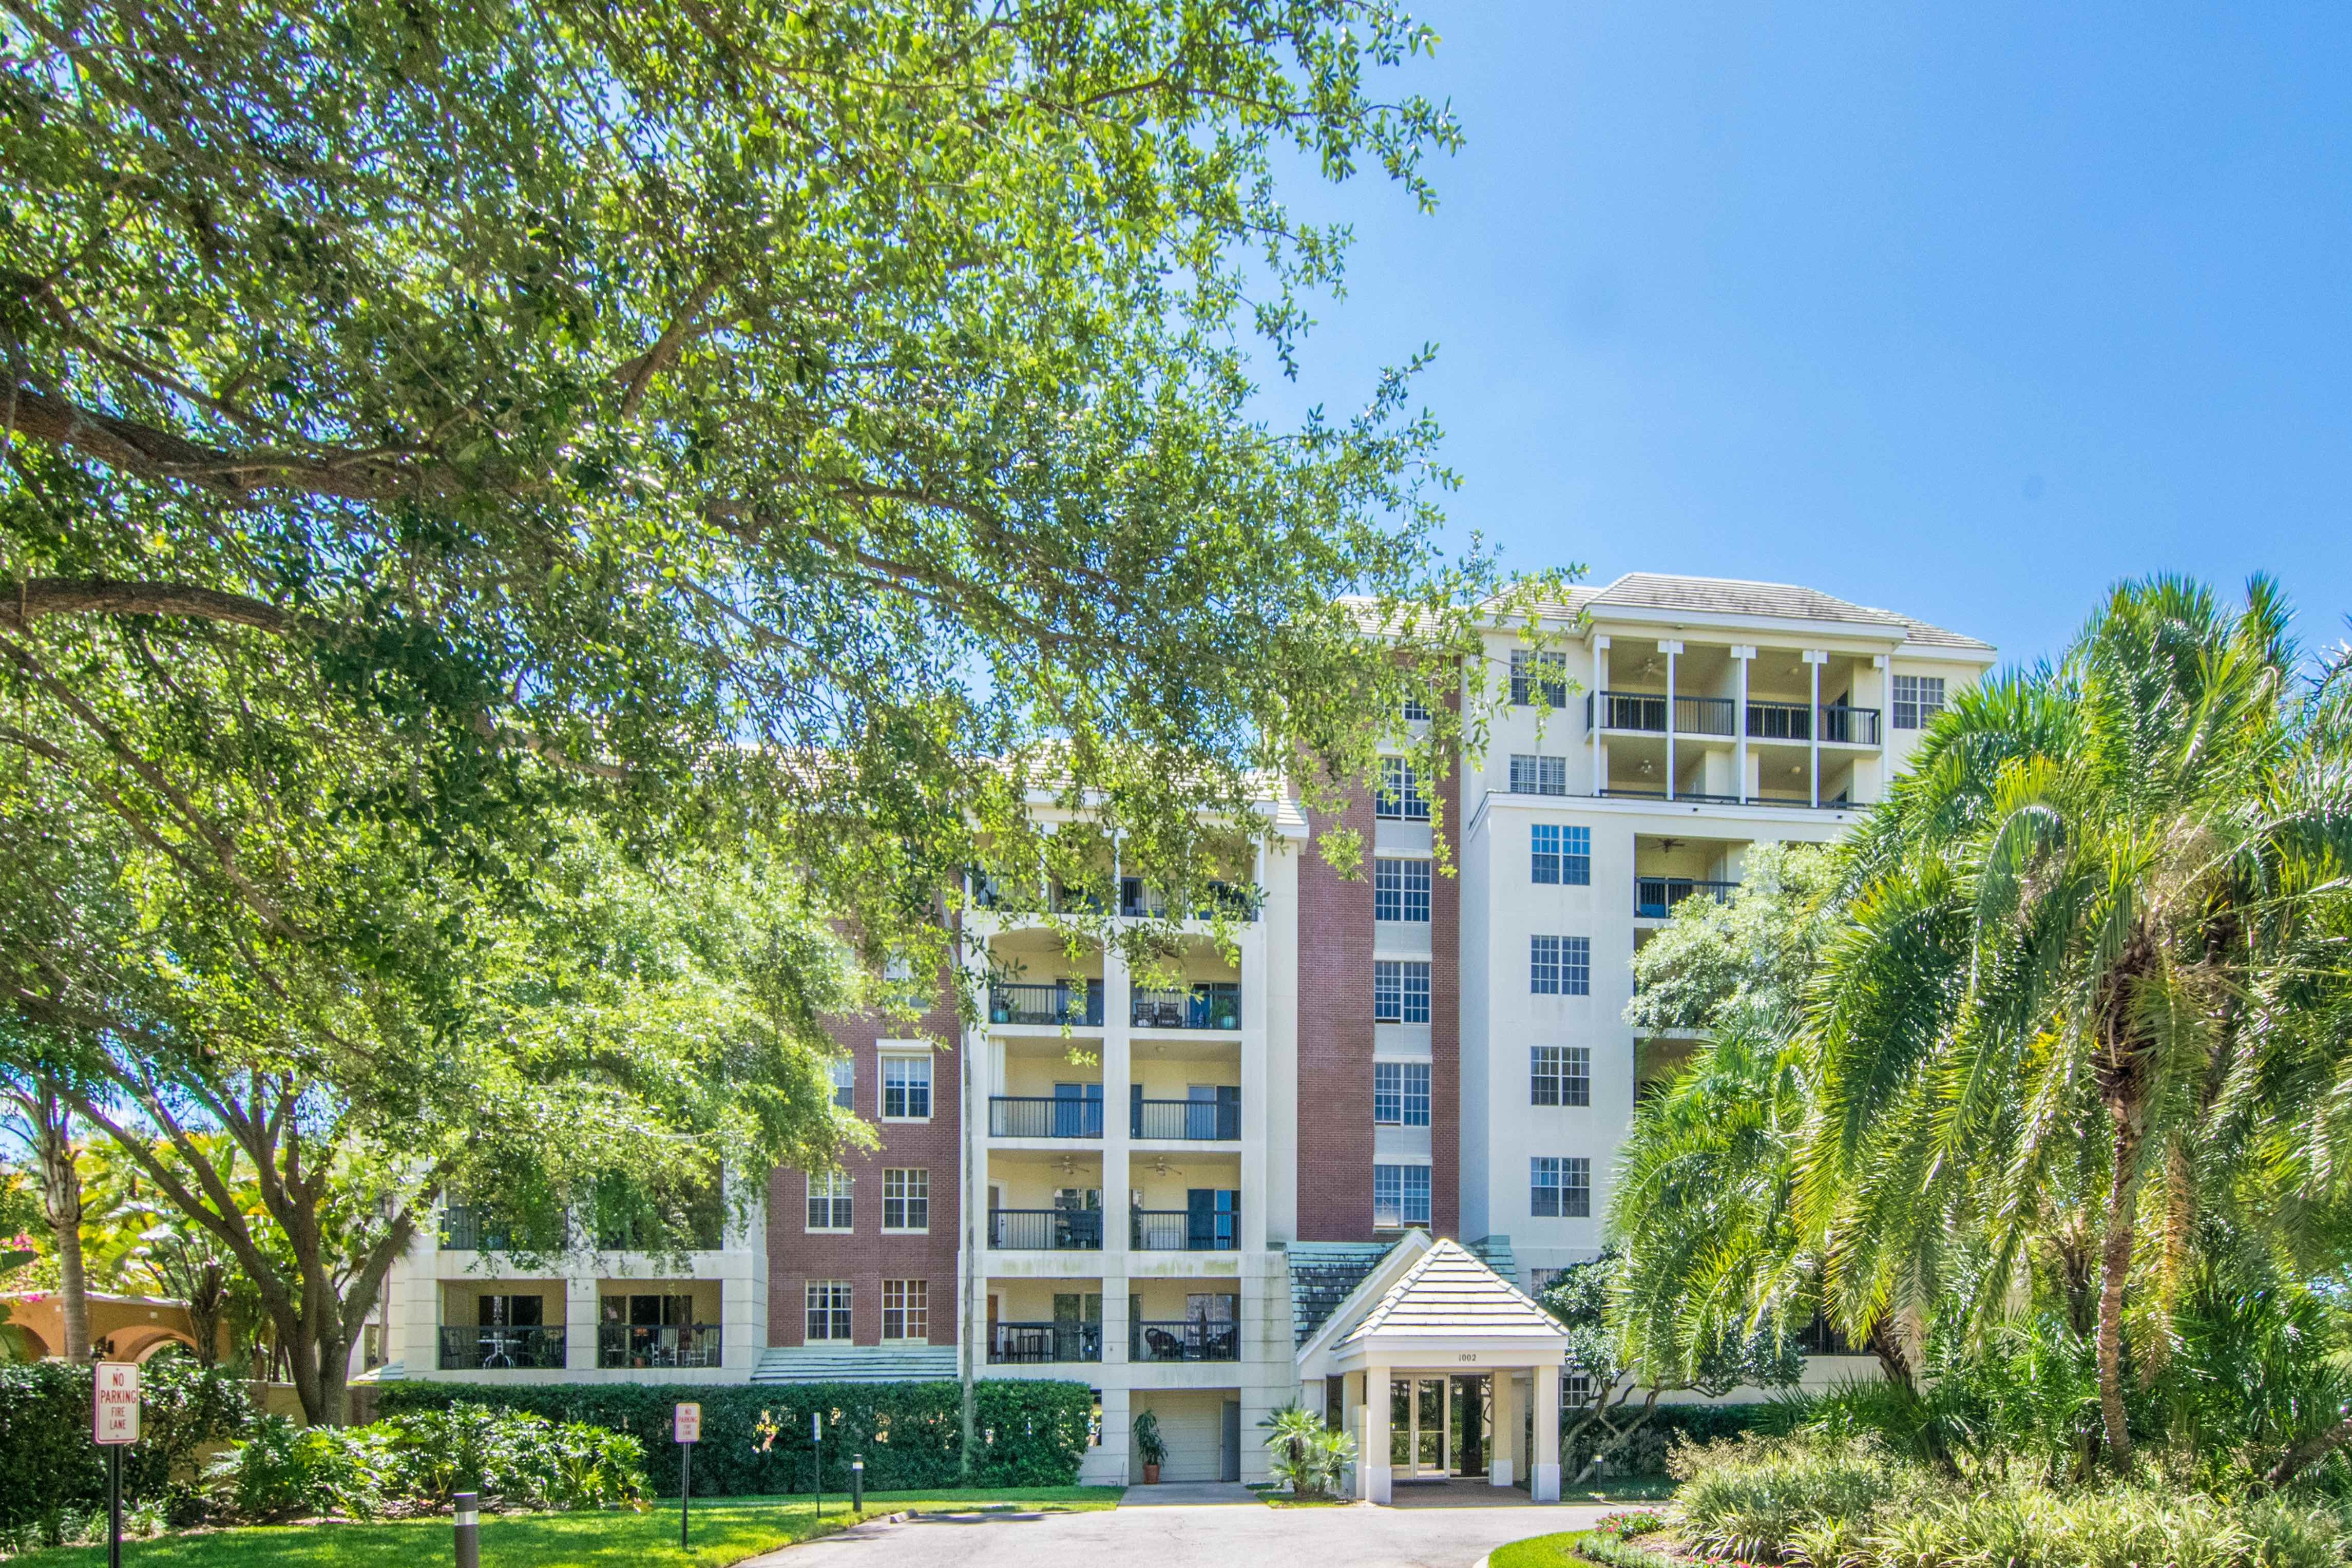 Harbour Court, Harbour Island, Florida Condos for Sale in Tampa